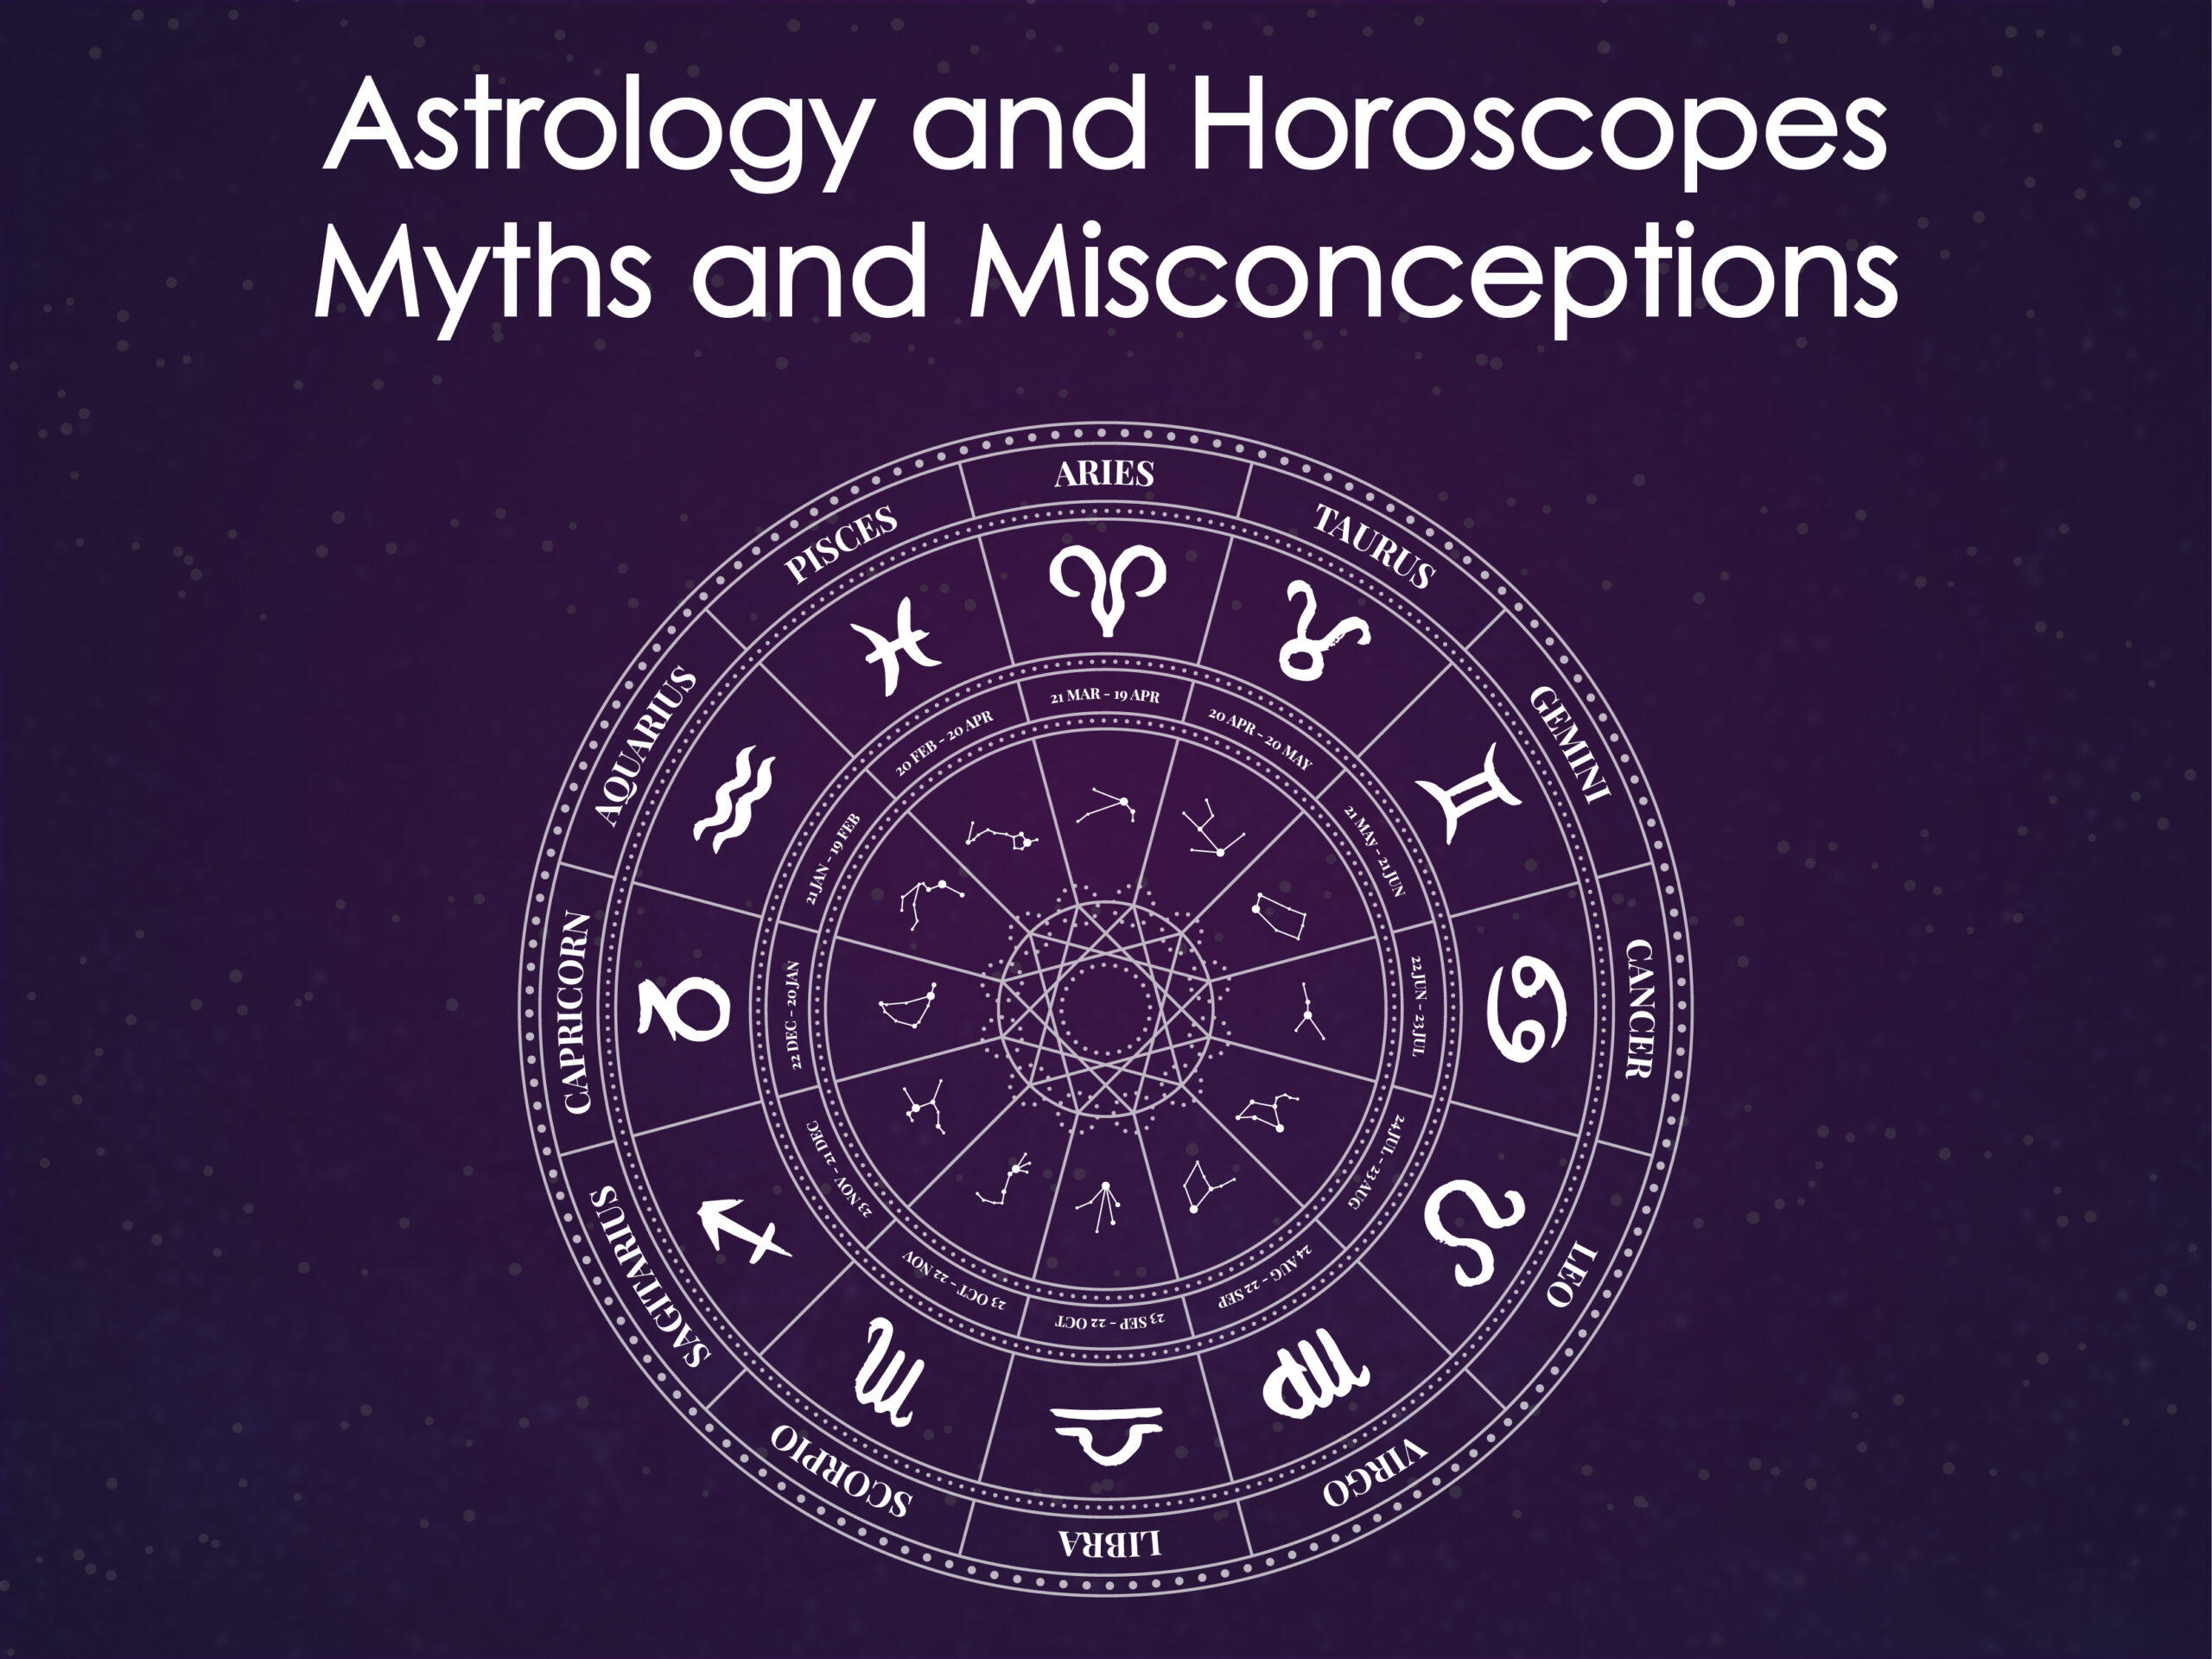 Astrology and Horoscopes myths and misconceptions 01 1 scaled